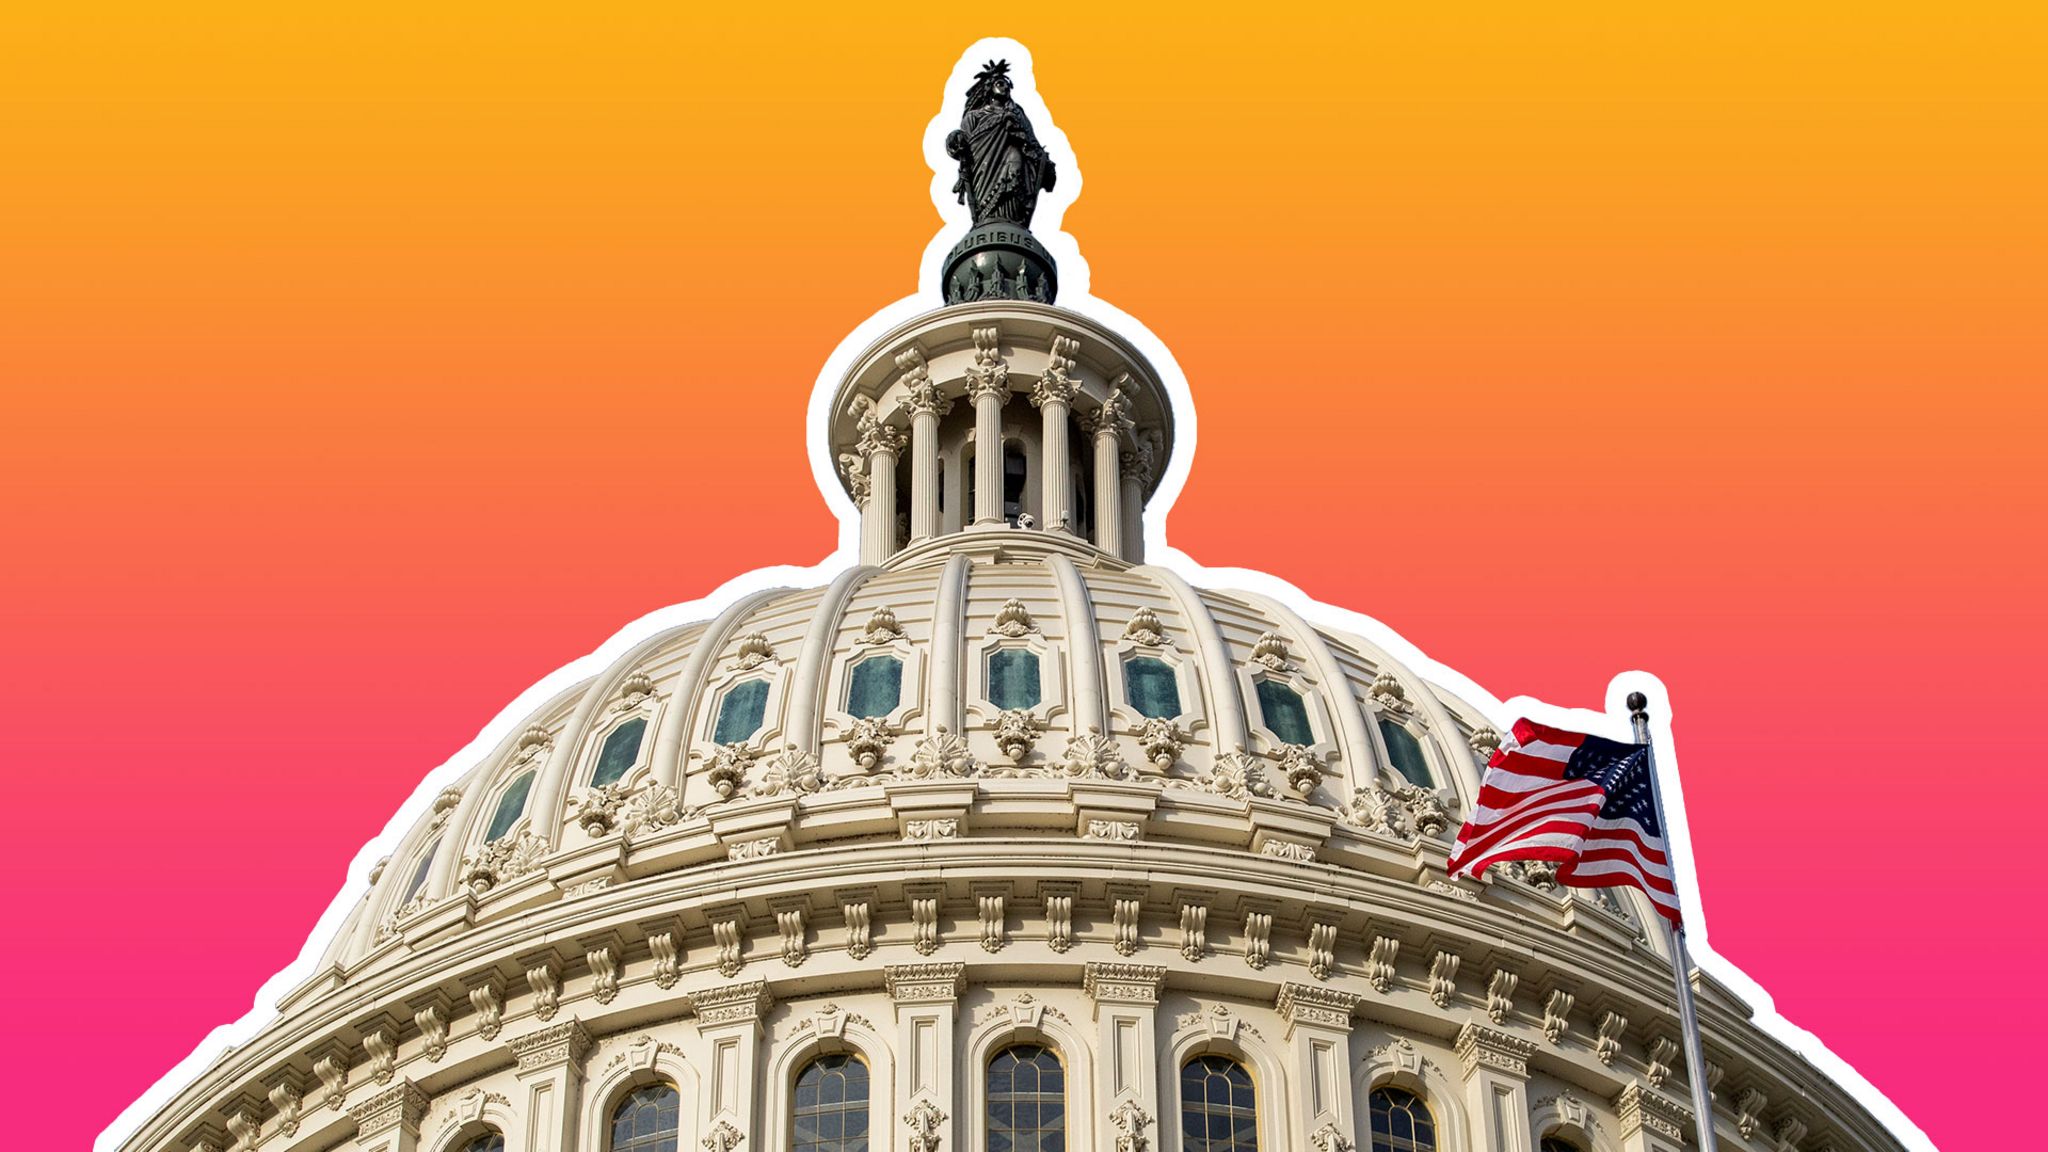 The US Capitol Building roof is seen cut out and set against the Tech Tent brand colours of deep magenta and orange